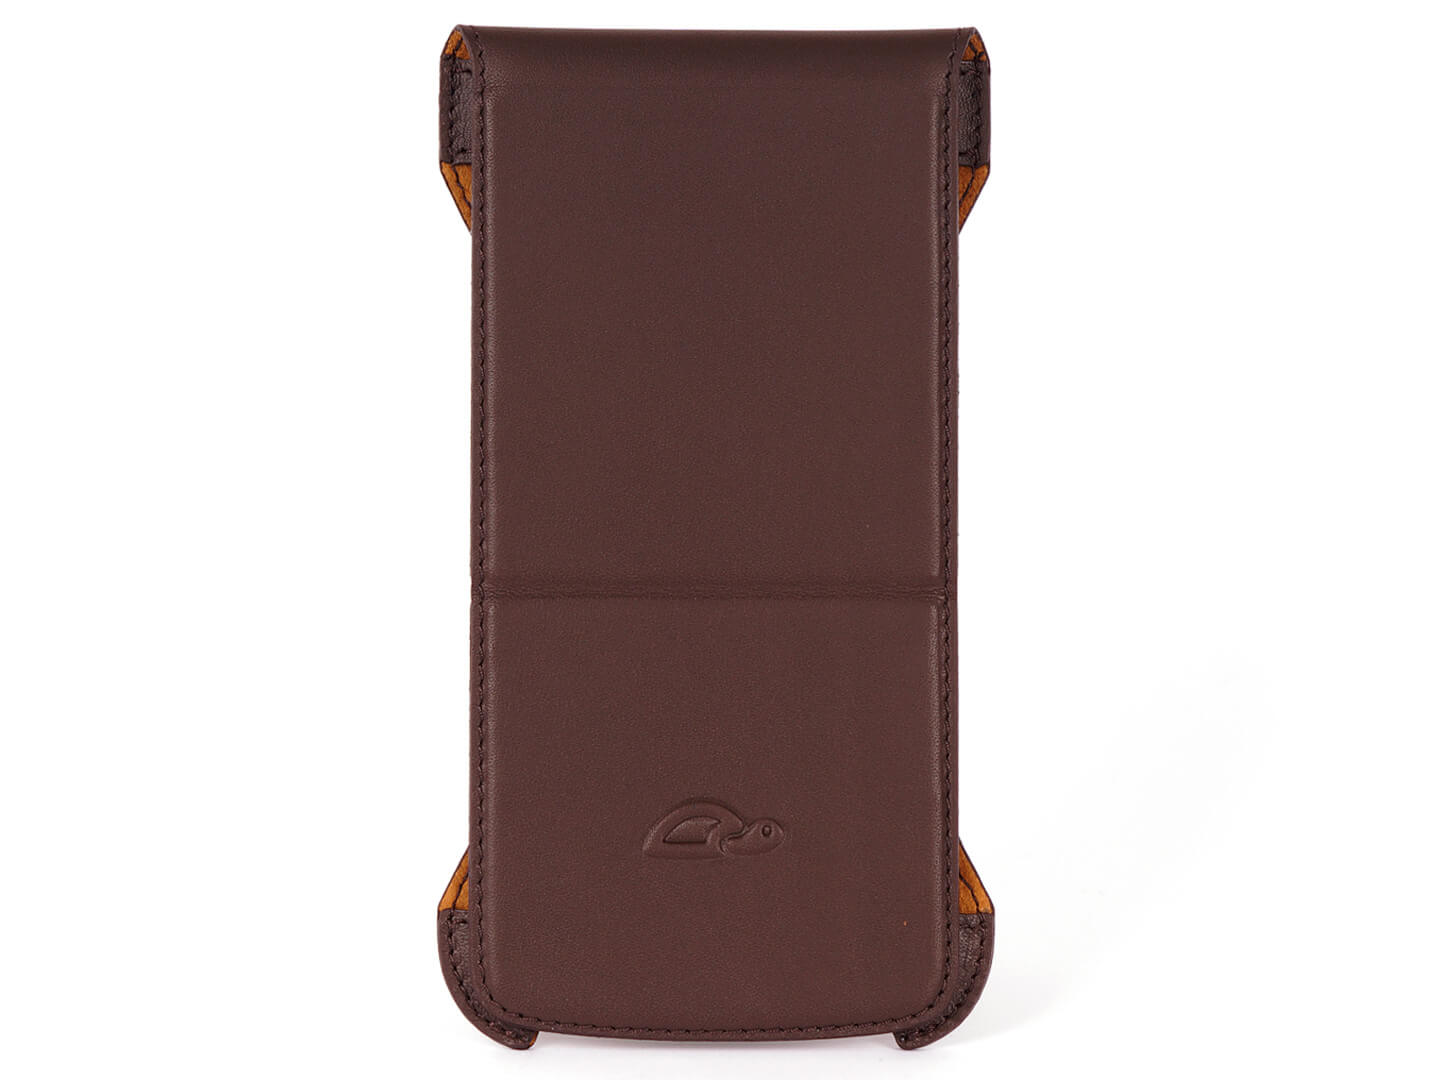 iPhone 6 Plus Flip Case - Vegtan Leather - Stand Function - Card Slot - top - brown - Carapaz